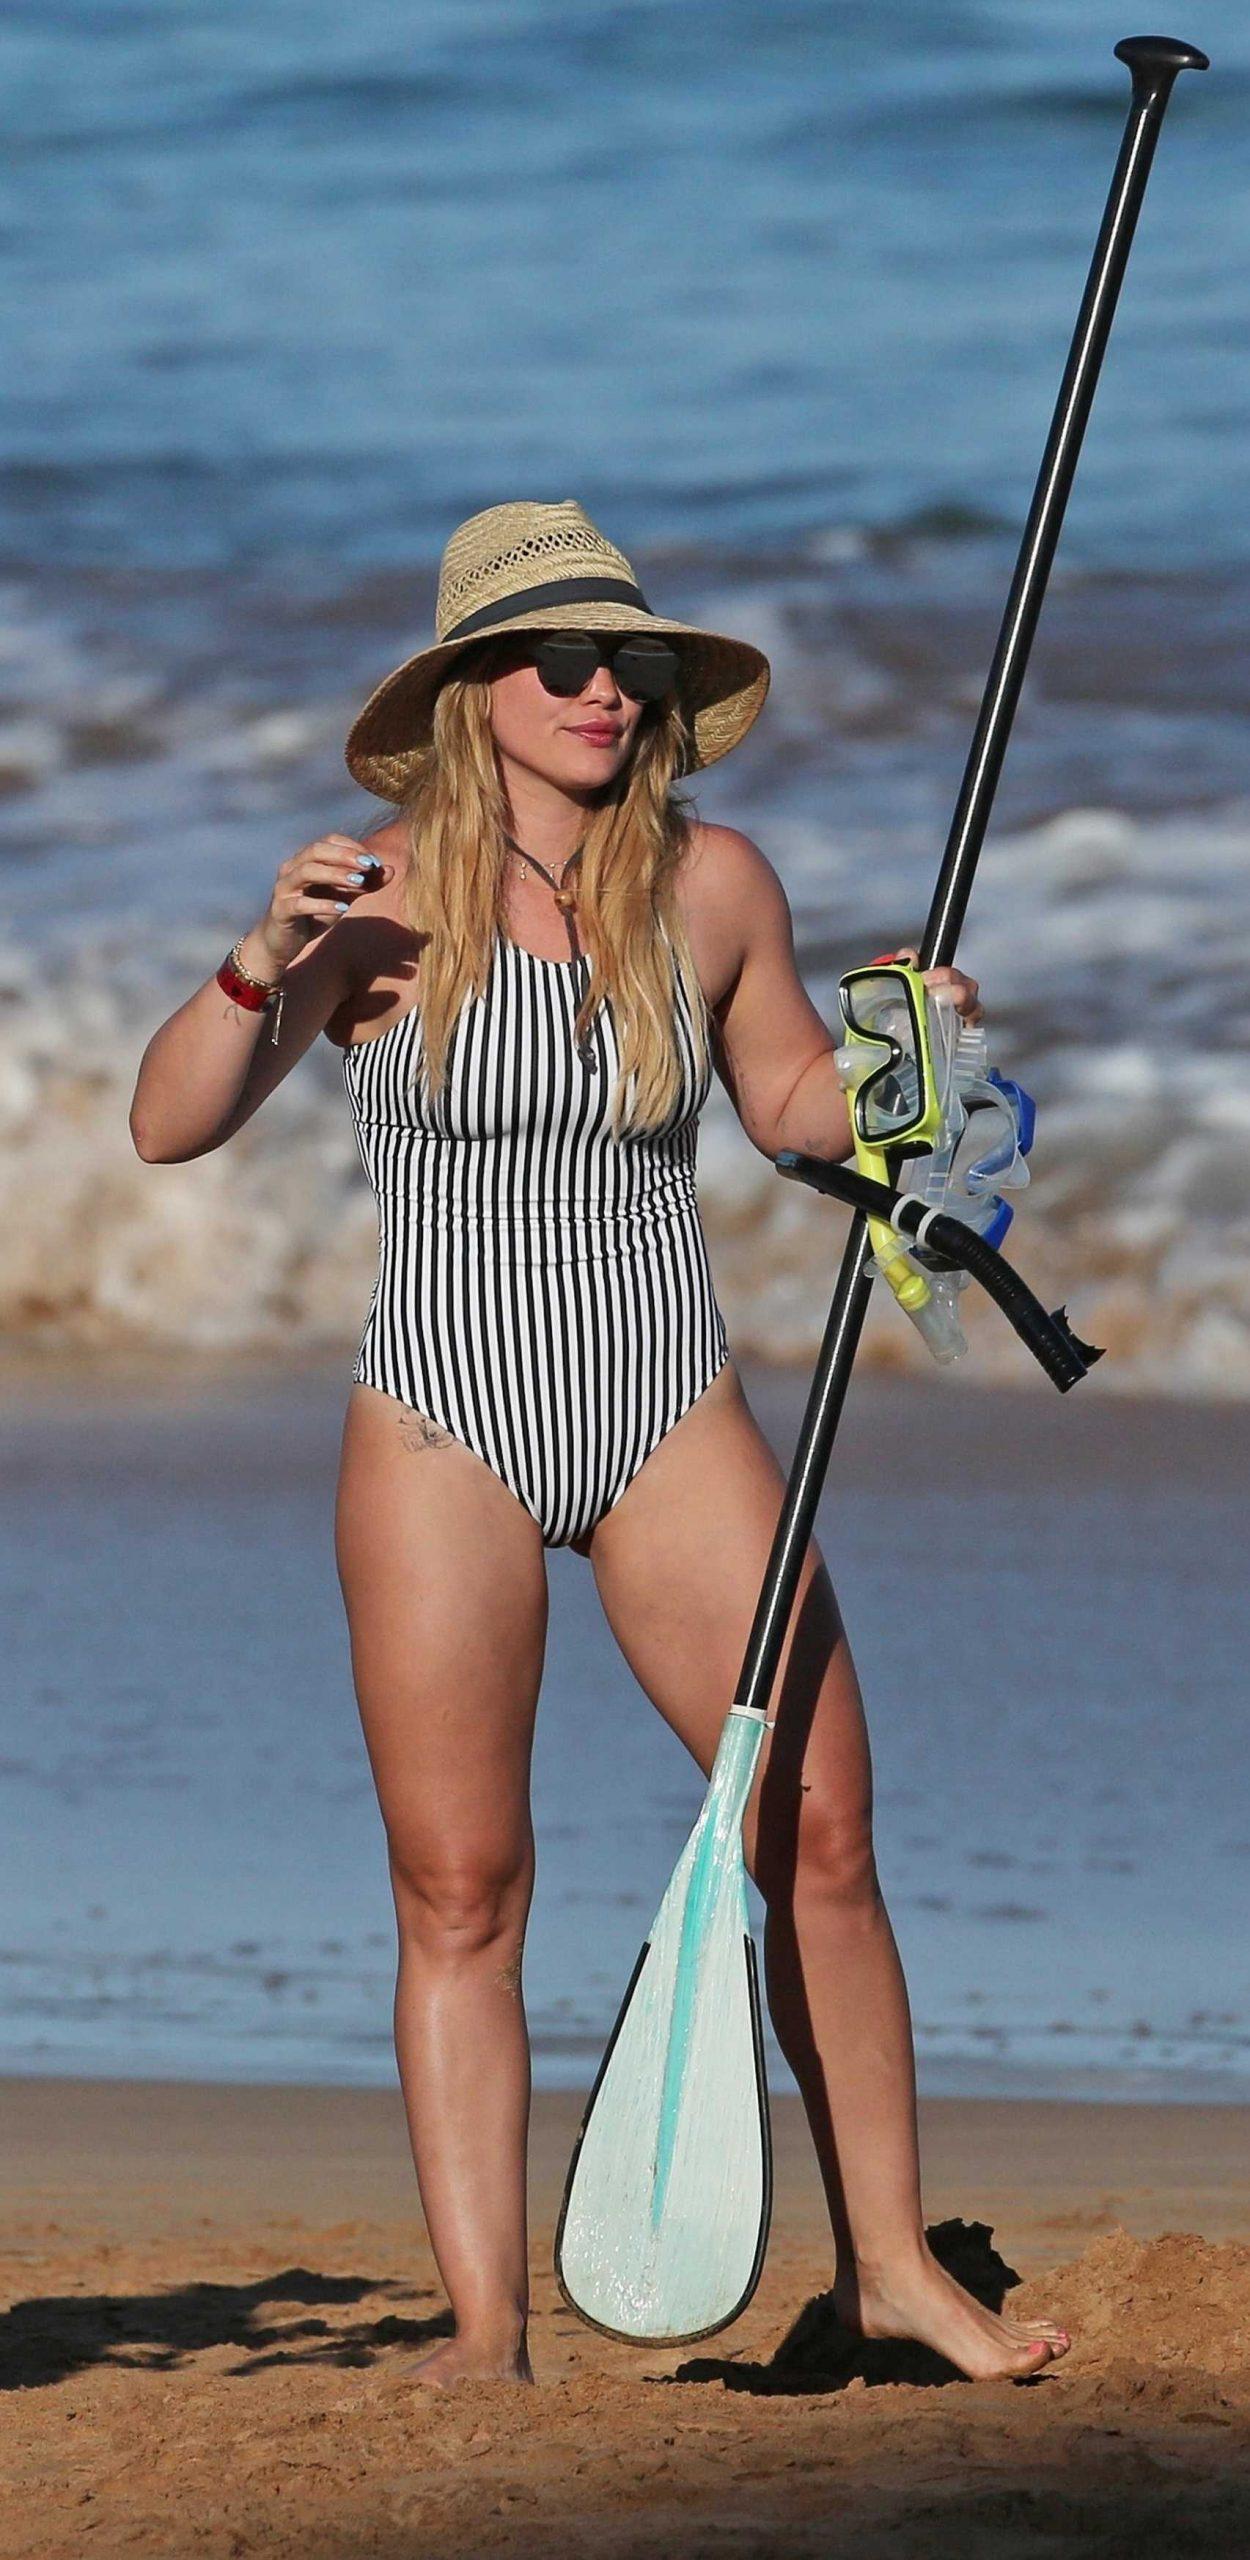 38 Nude Pictures Of Hilary Duff Are An Appeal For Her Fans | Best Of Comic Books